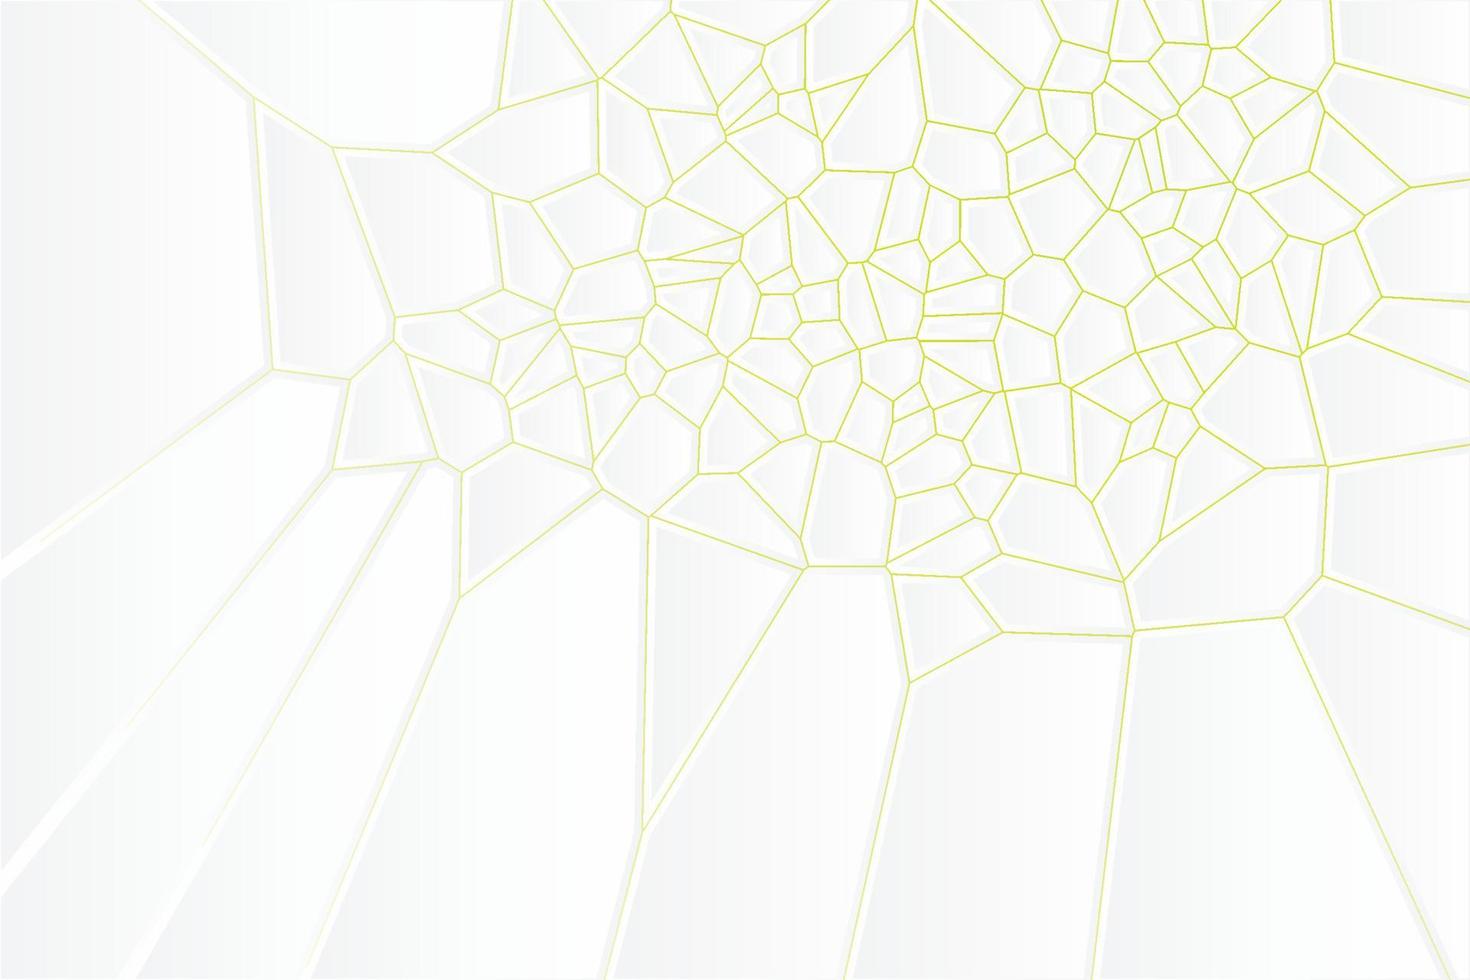 Abstract white Voronoi diagram blocks cell pattern. Geometric broken background wall with gradient backlight design vector